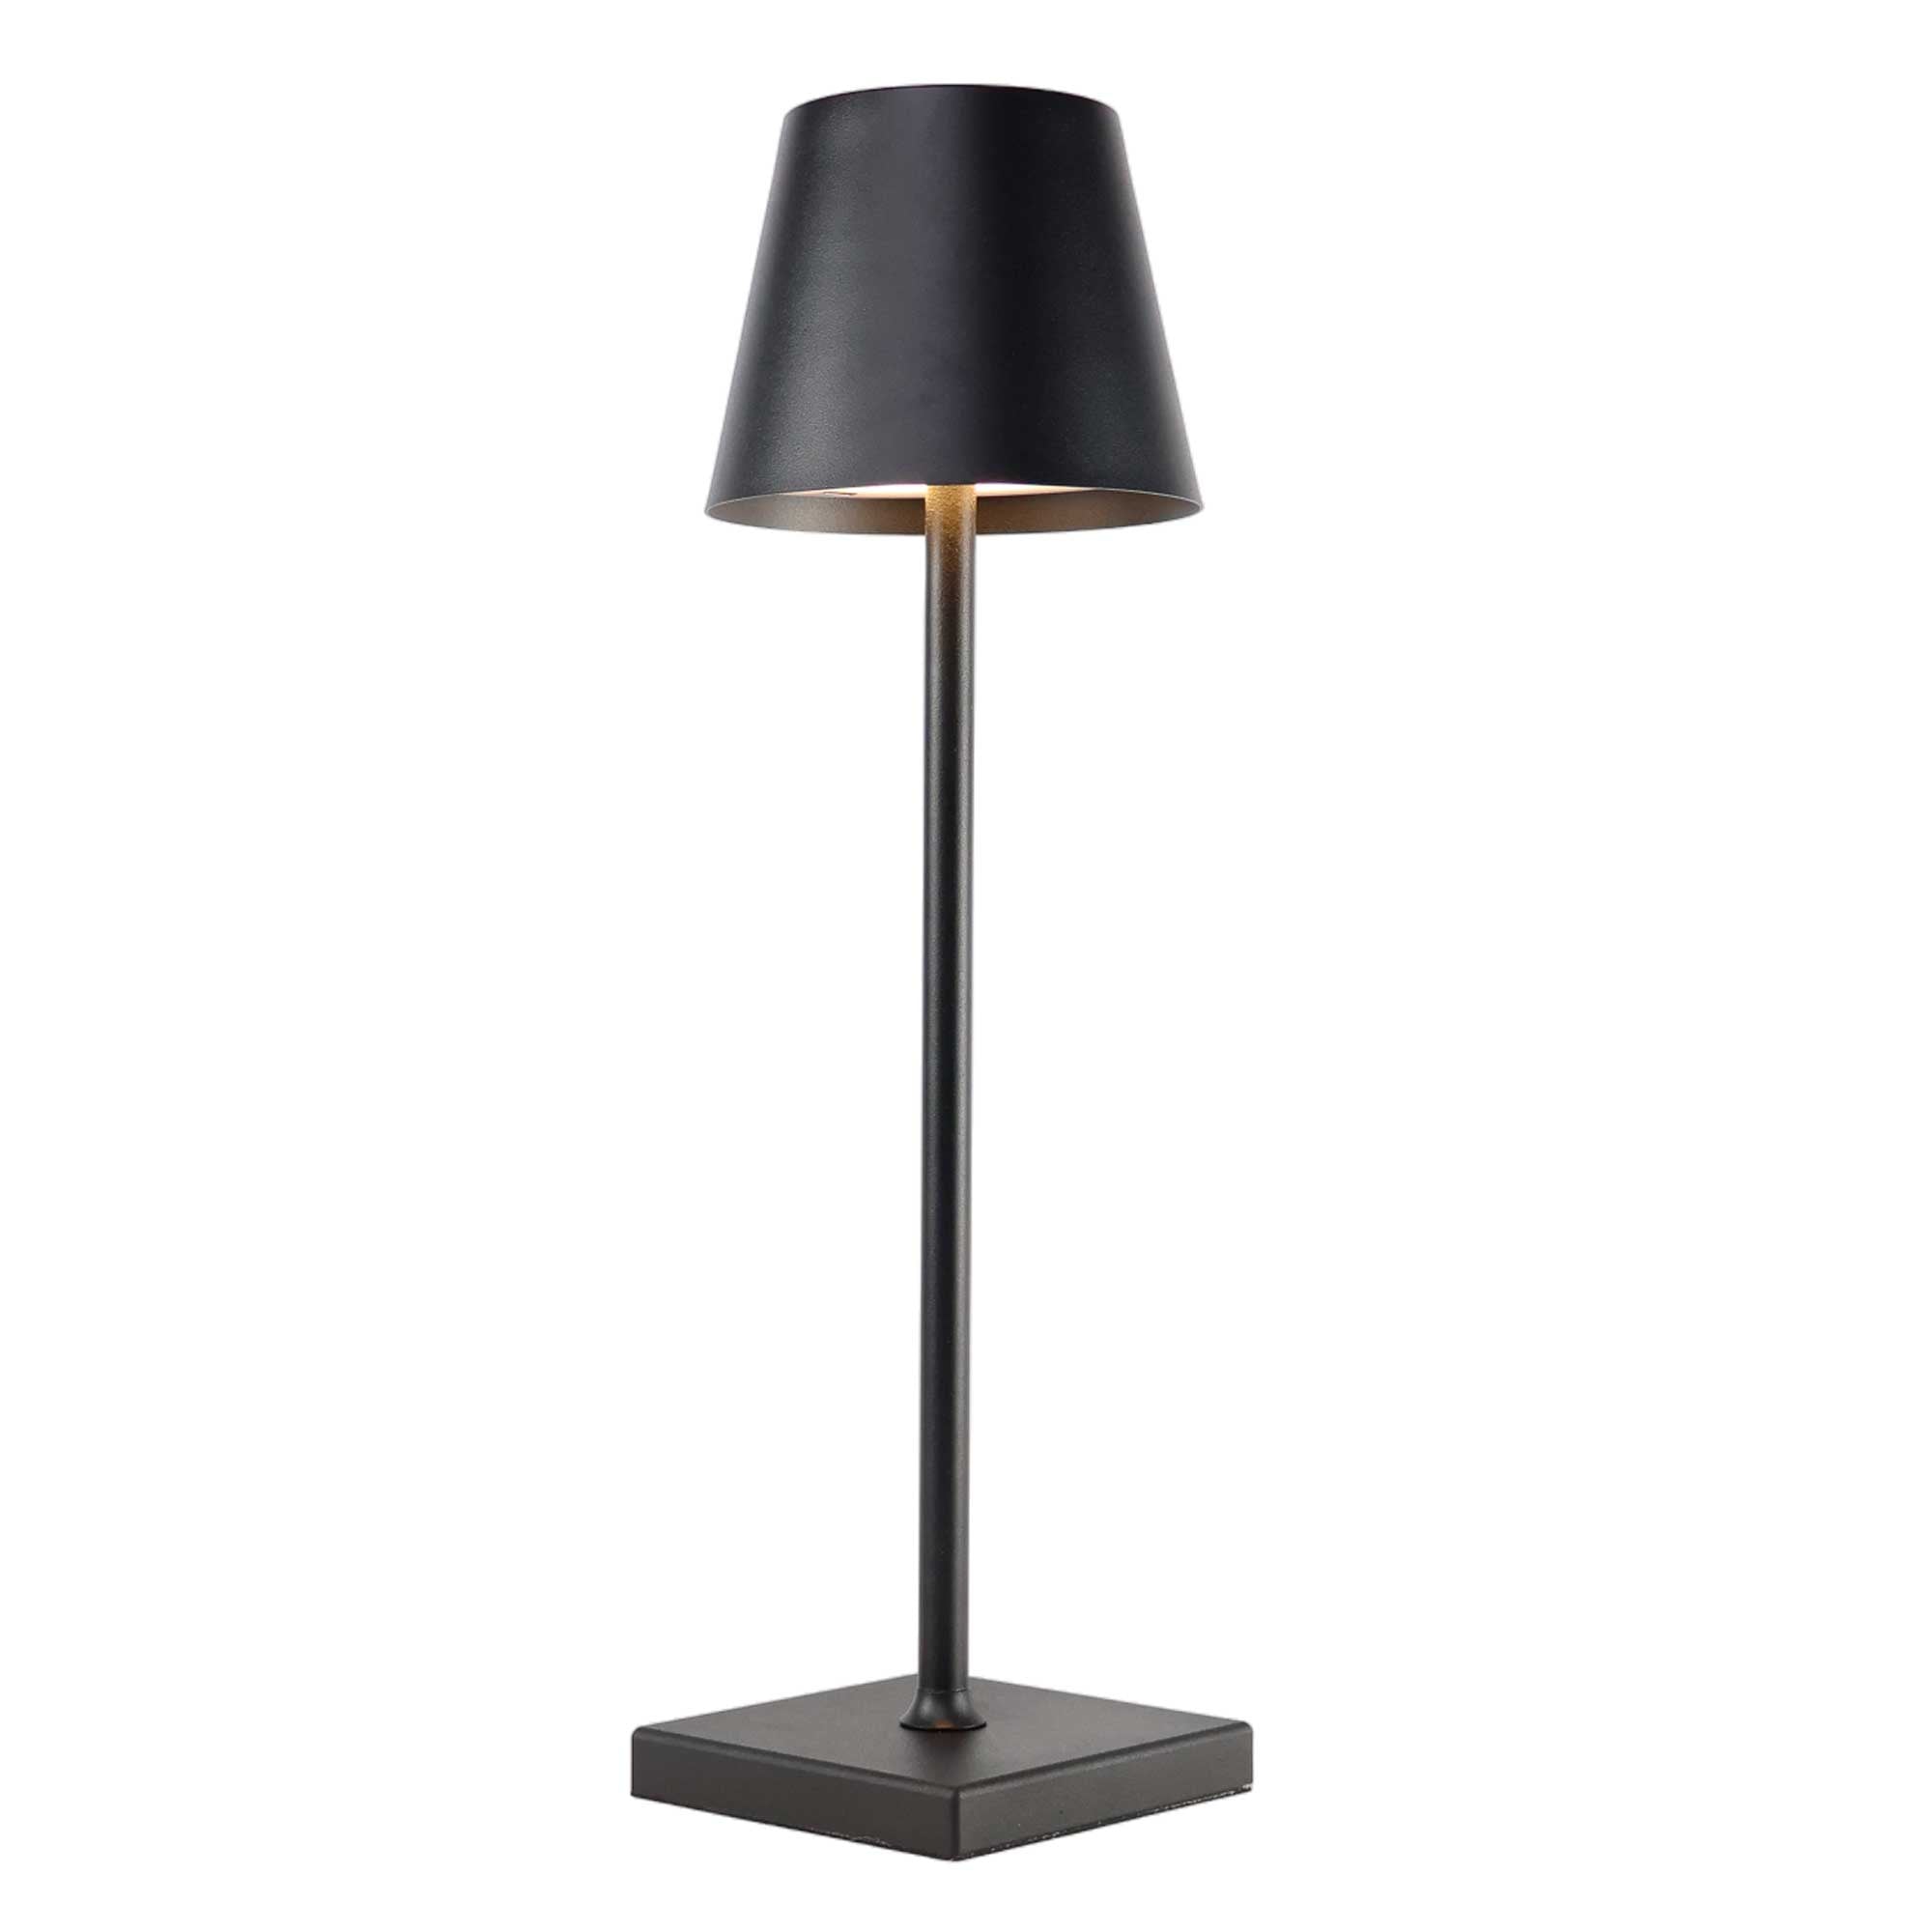 Ambience lamp with touch function - 3 colors. Black - white - gold